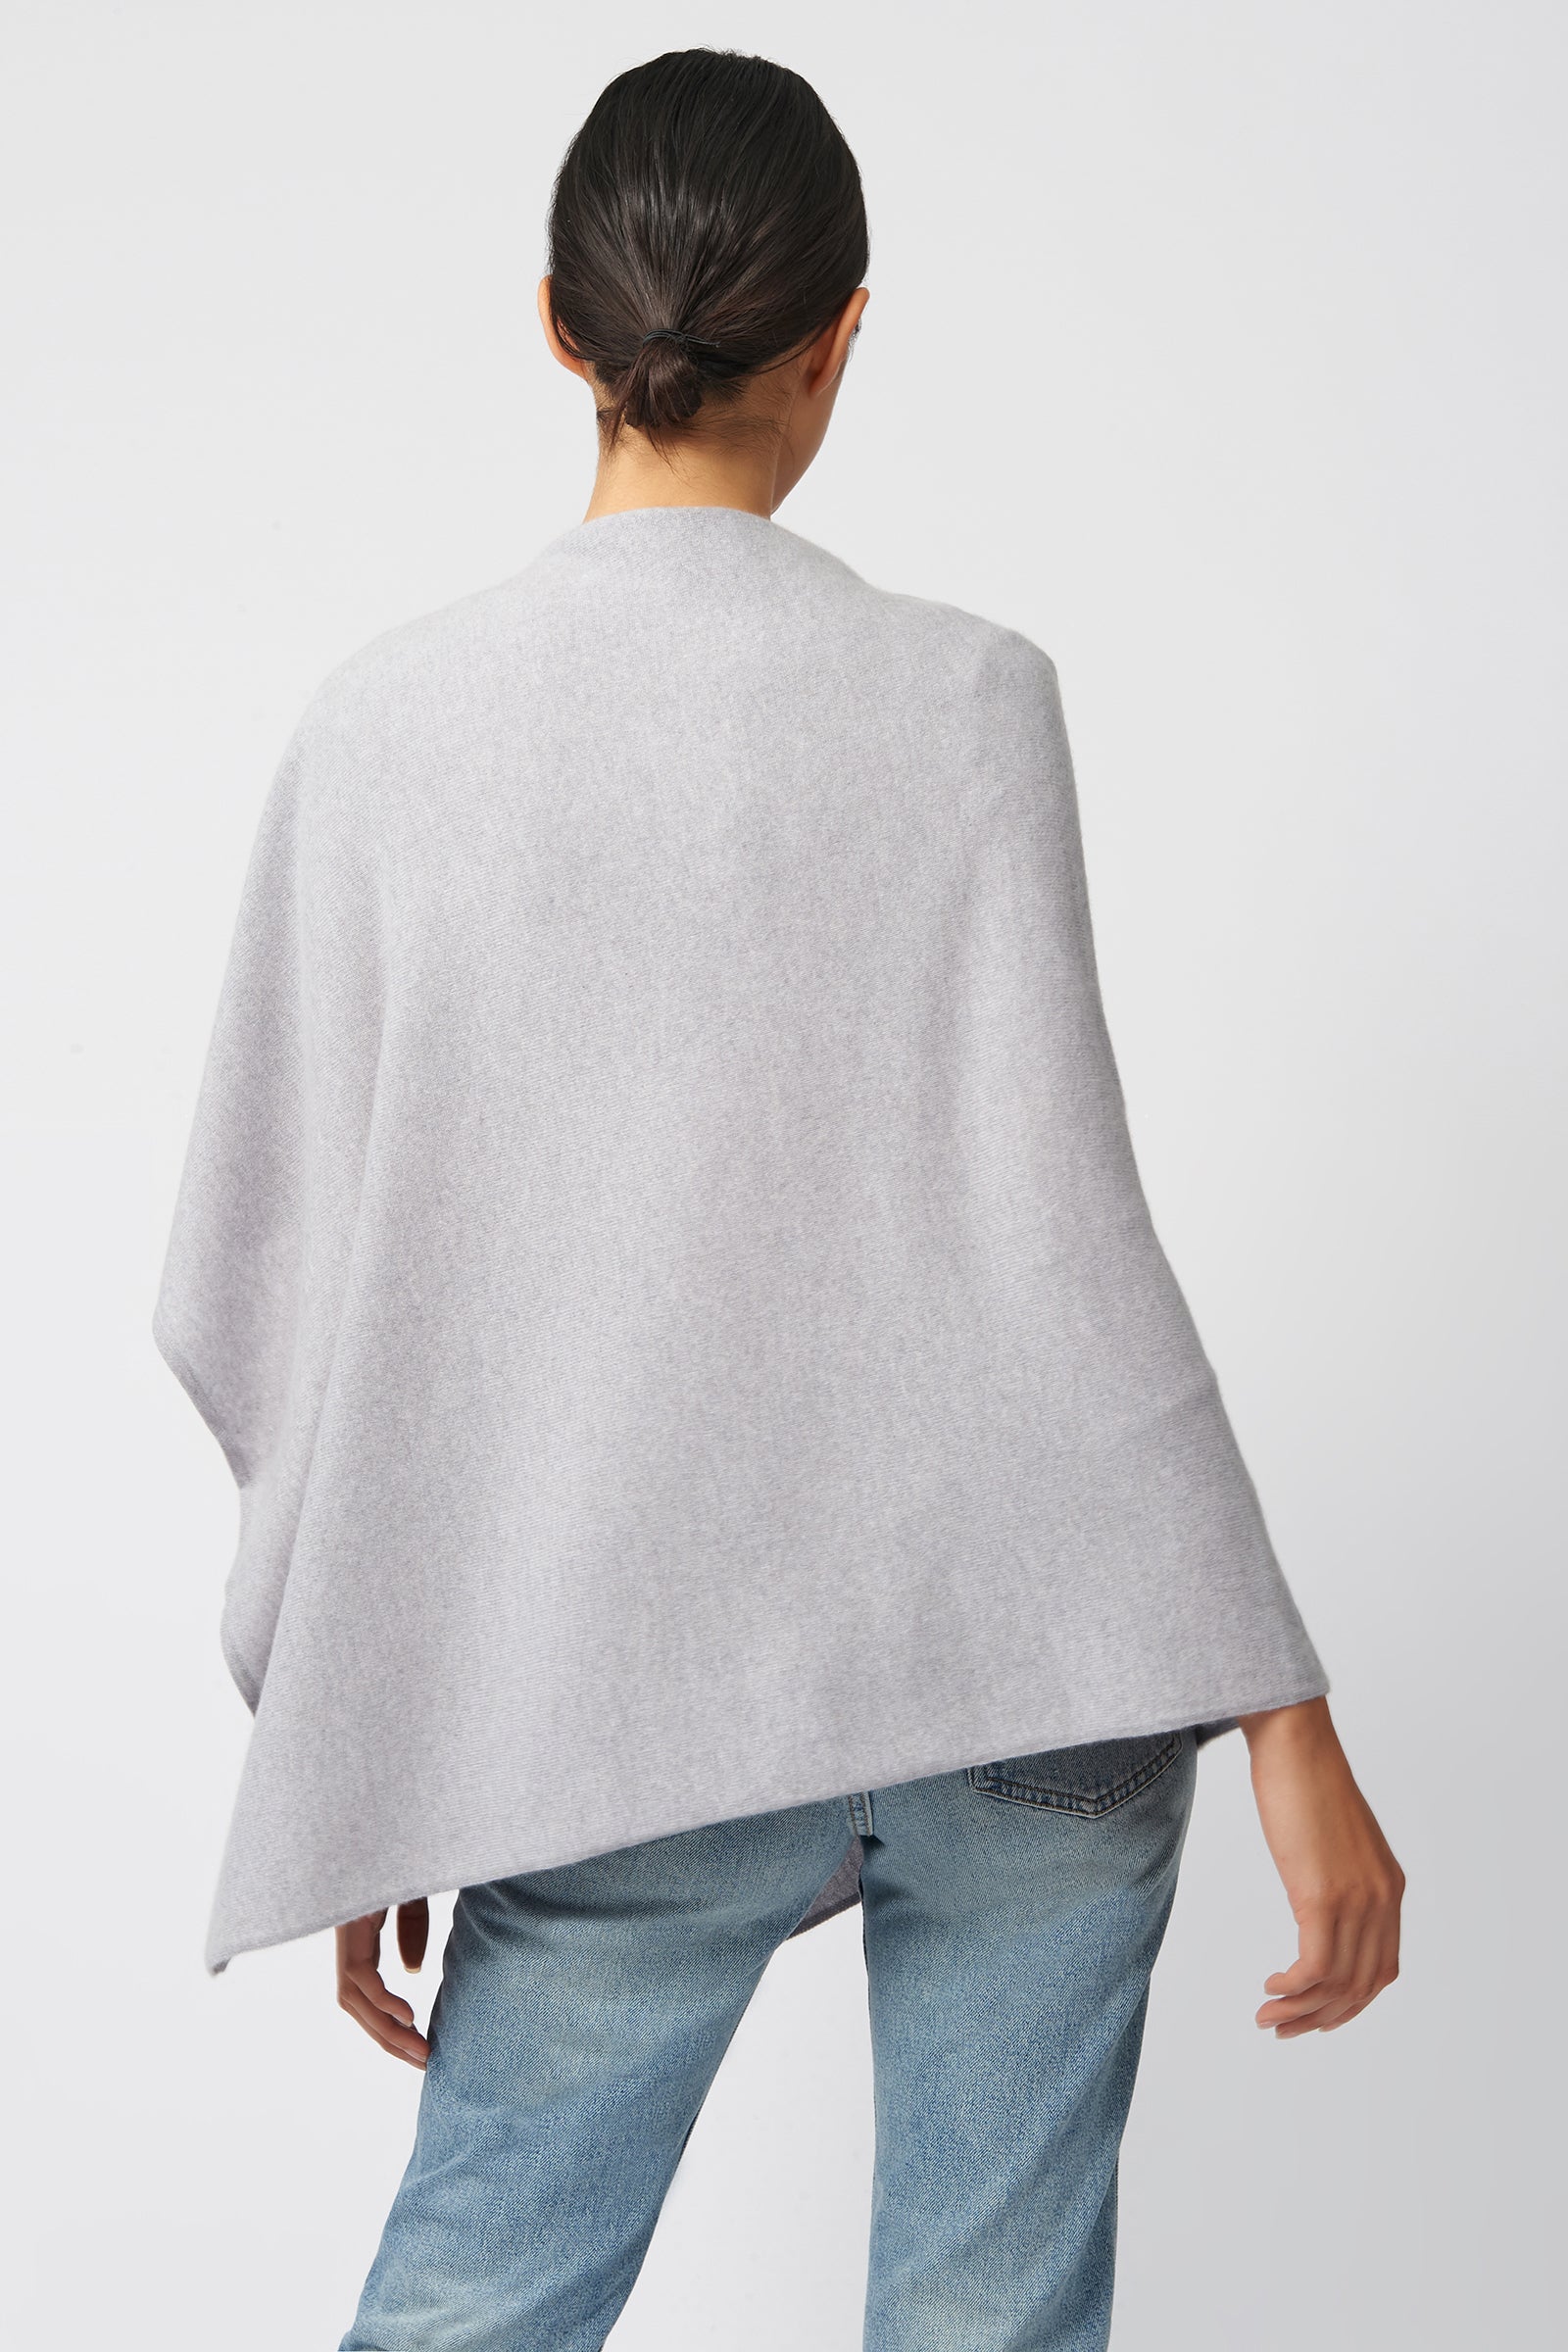 Kal Rieman Cashmere Poncho in Grey Heather on Model Side View